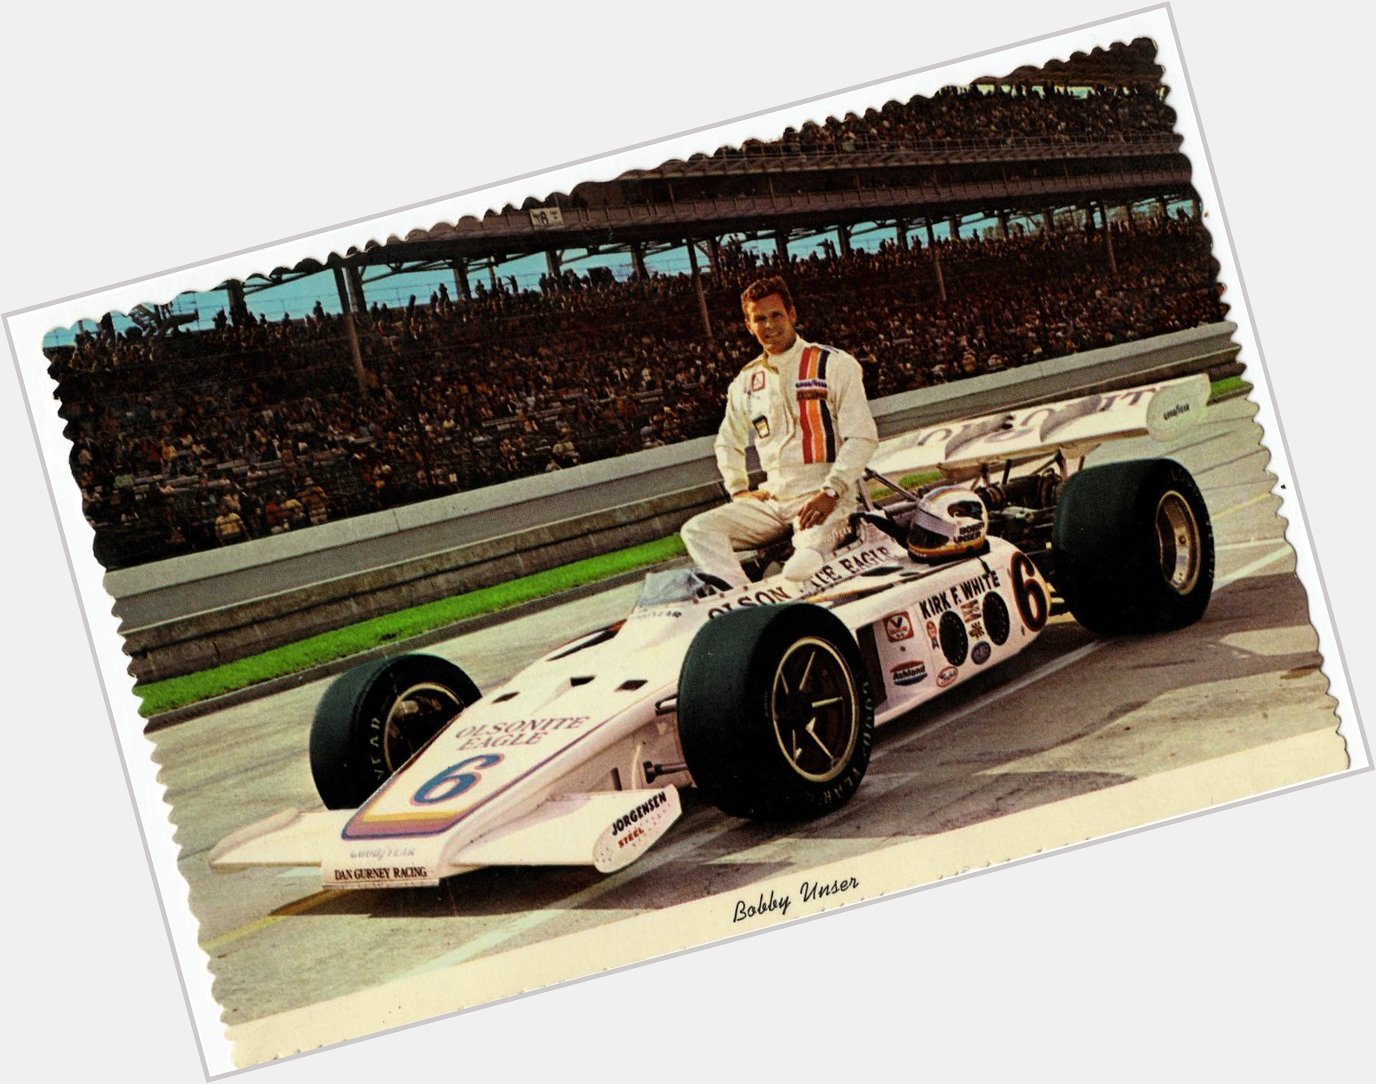 Happy Birthday to Bobby Unser, who turns 84 today! 